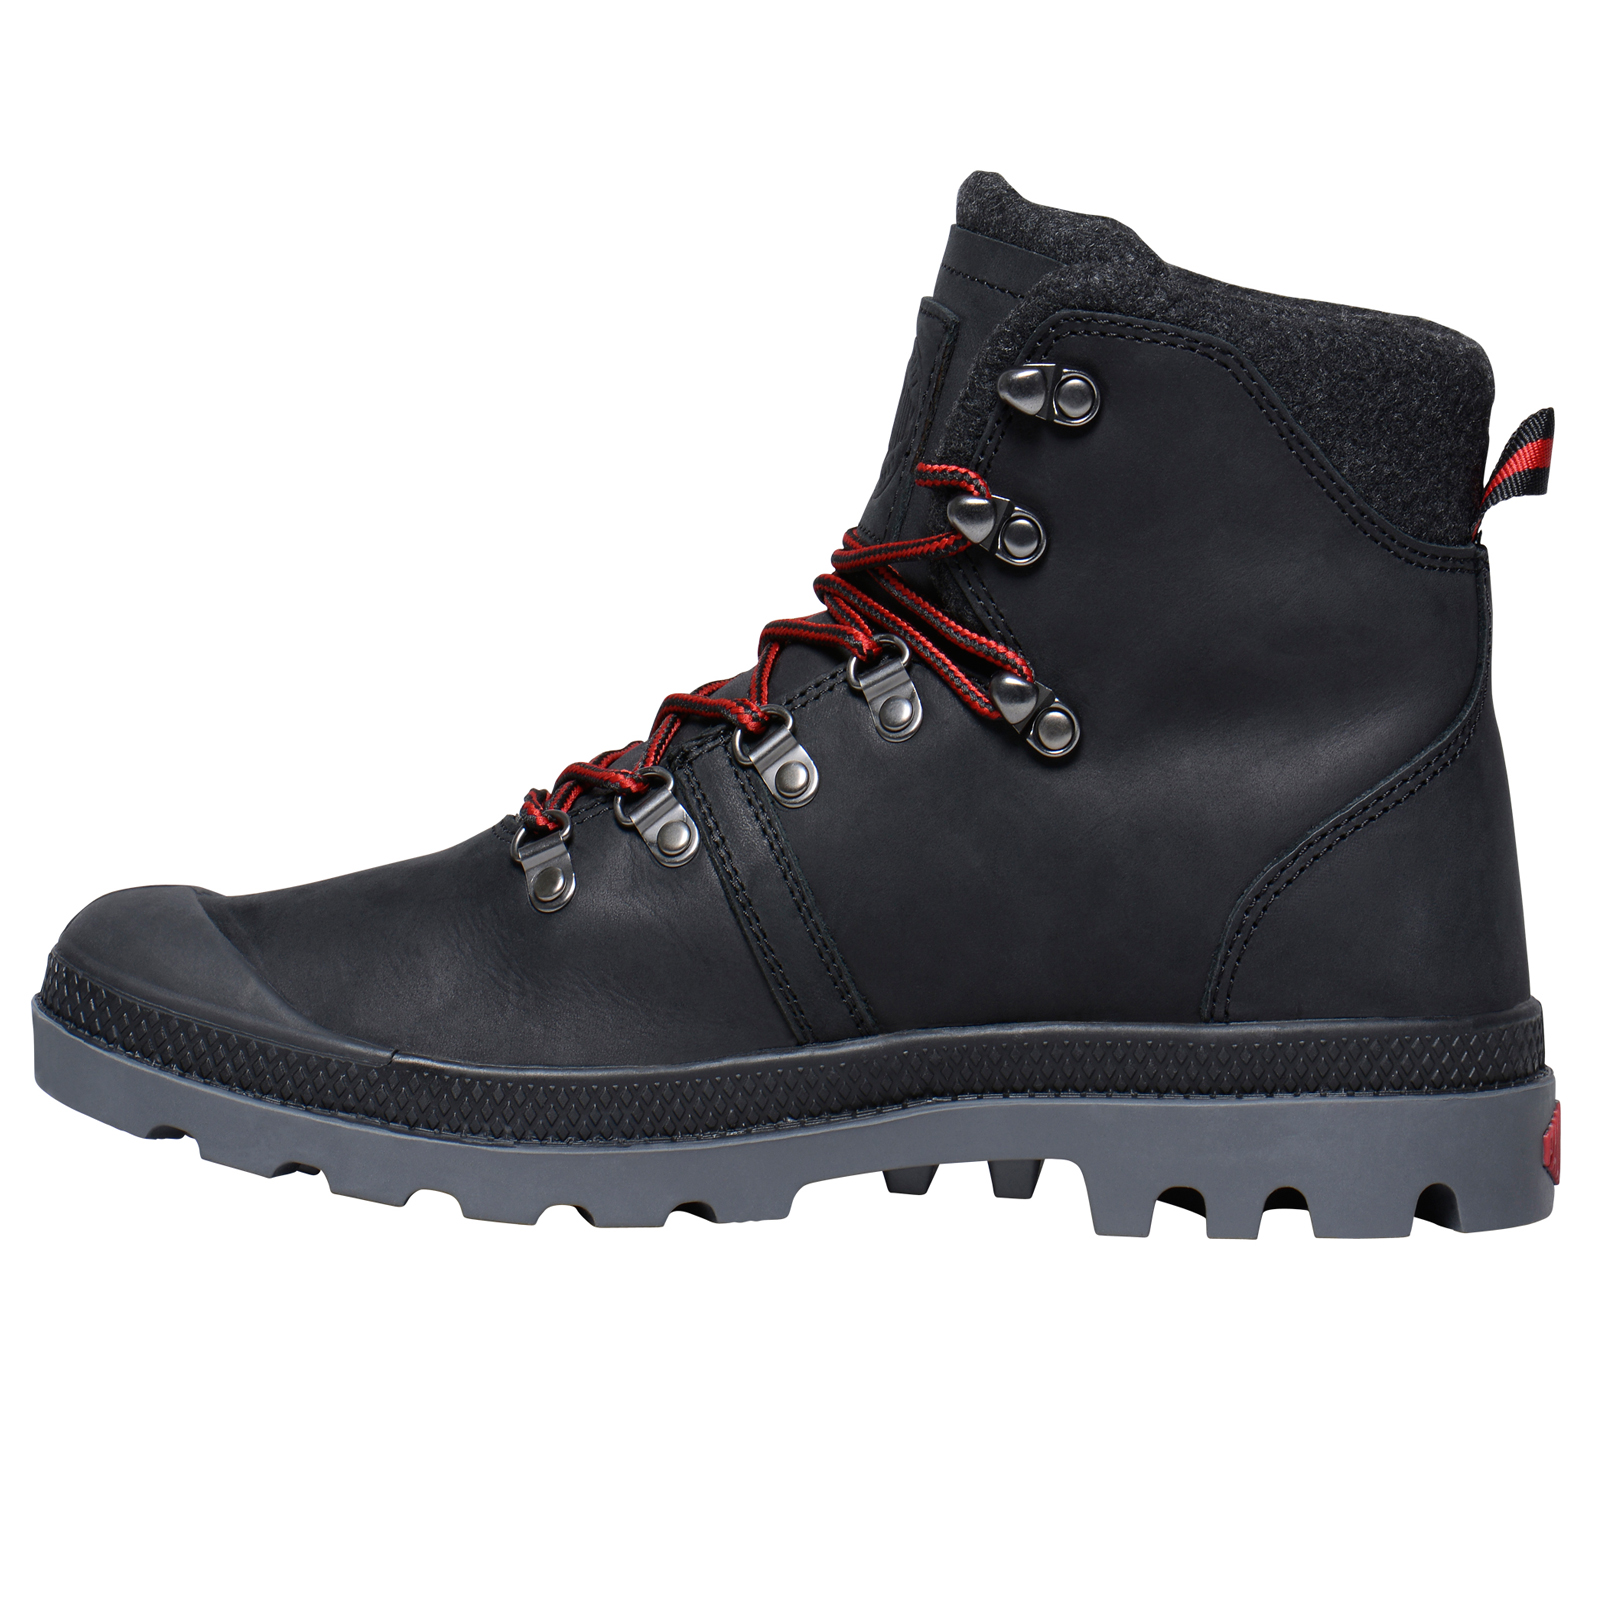 Palladium Men's Pallabrouse Hiker Boots Padded Leather Lace Up Hook ...